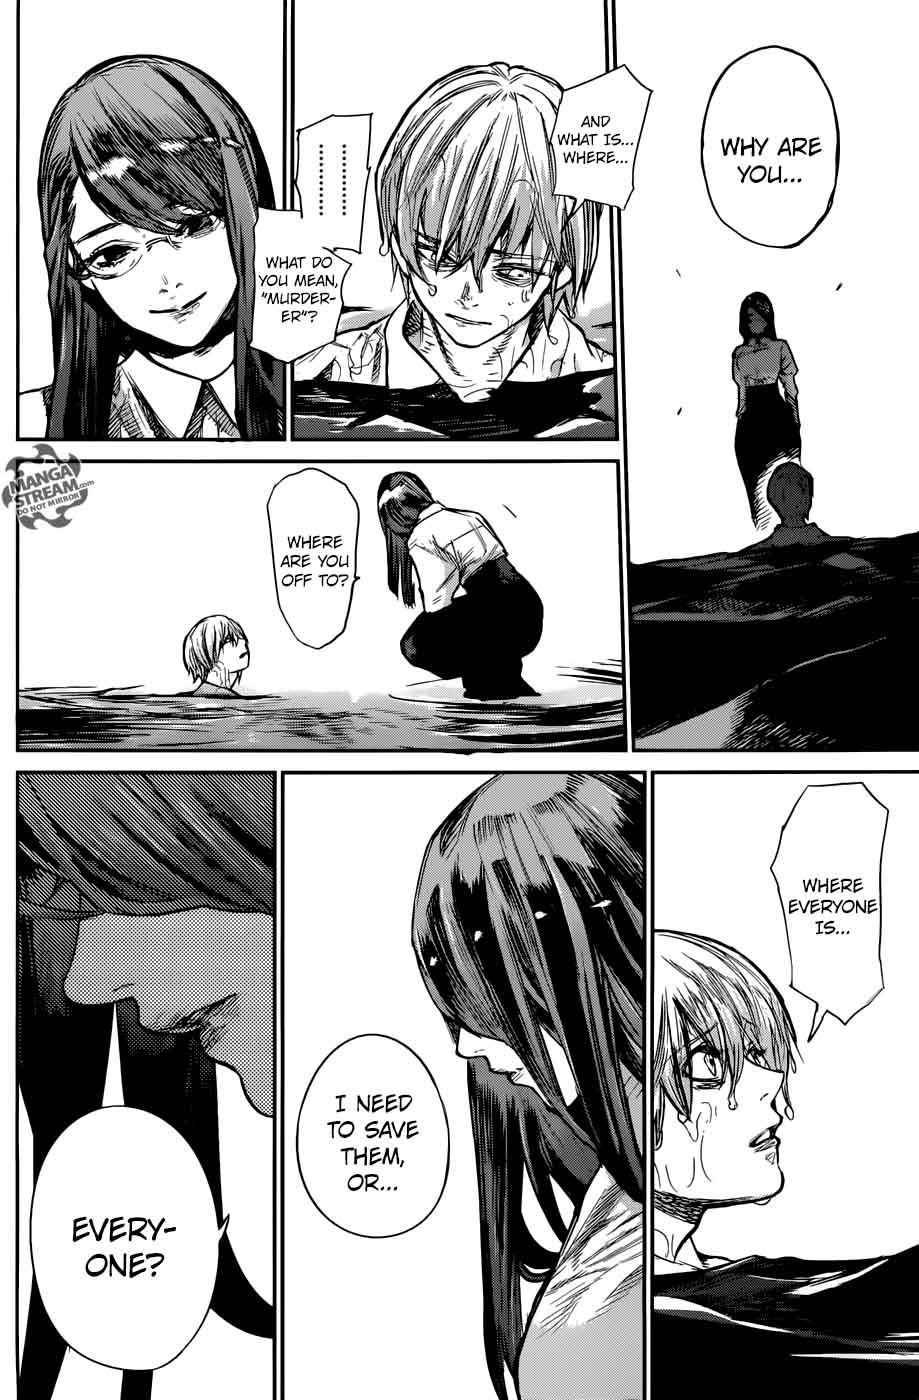 Tokyo Ghoul Re Chapter 158 Right Tokyo Ghoul Manga Online